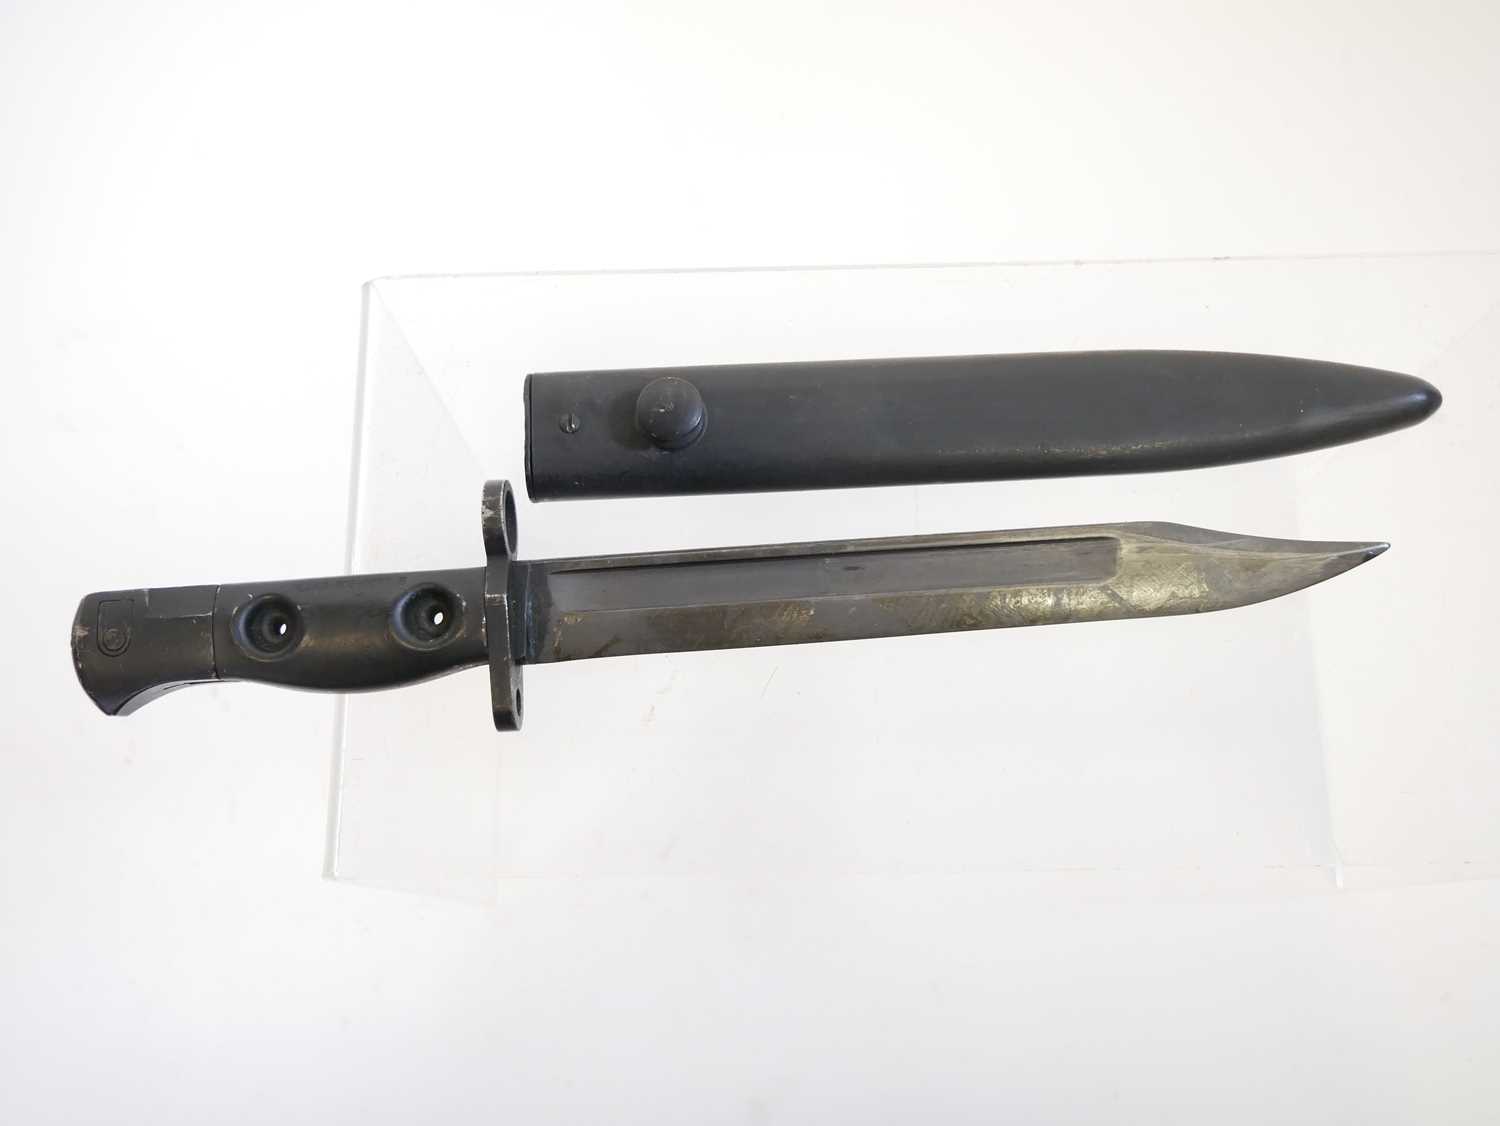 L1A3 SLR bayonet and scabbard, finished black all over, the grip stamped L1A3 960-0257 B. Buyer must - Image 2 of 7